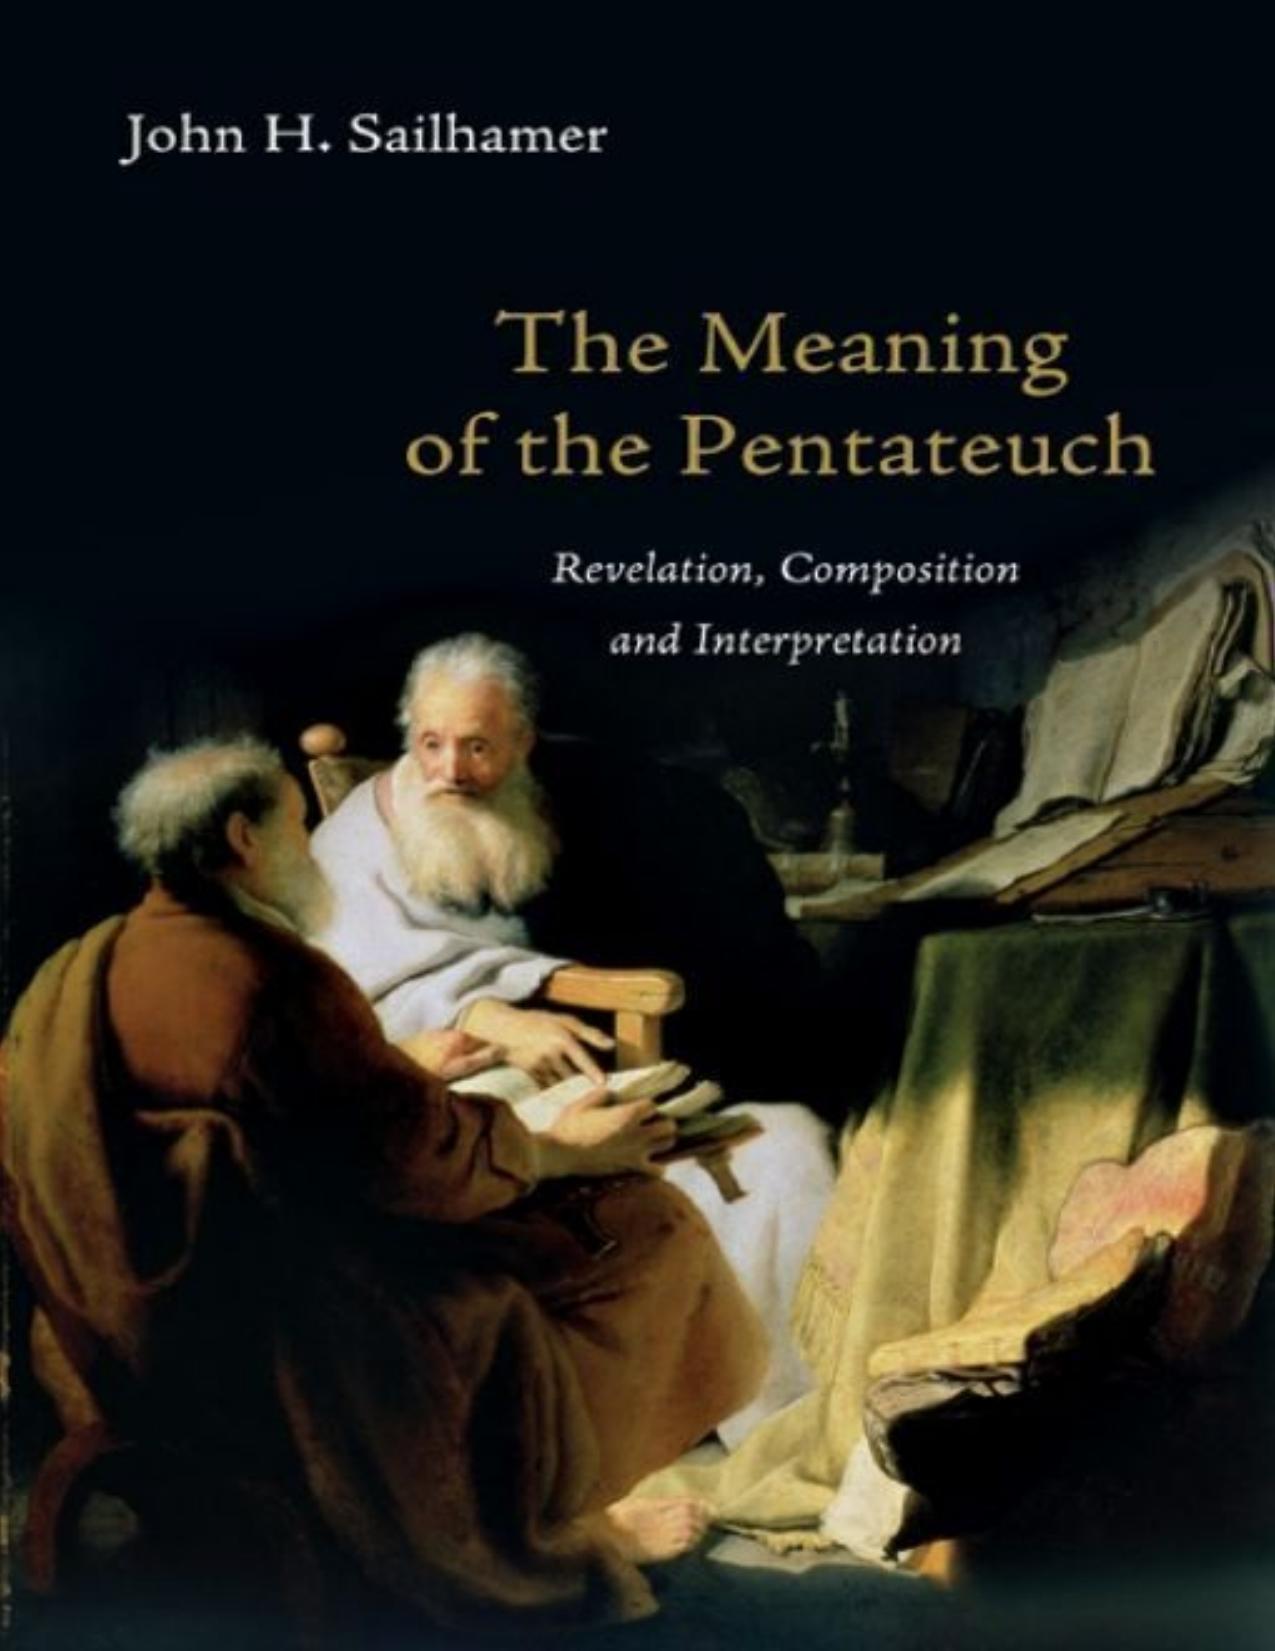 The Meaning of the Pentateuch Revelation, Composition and Interpretation - PDFDrive.com